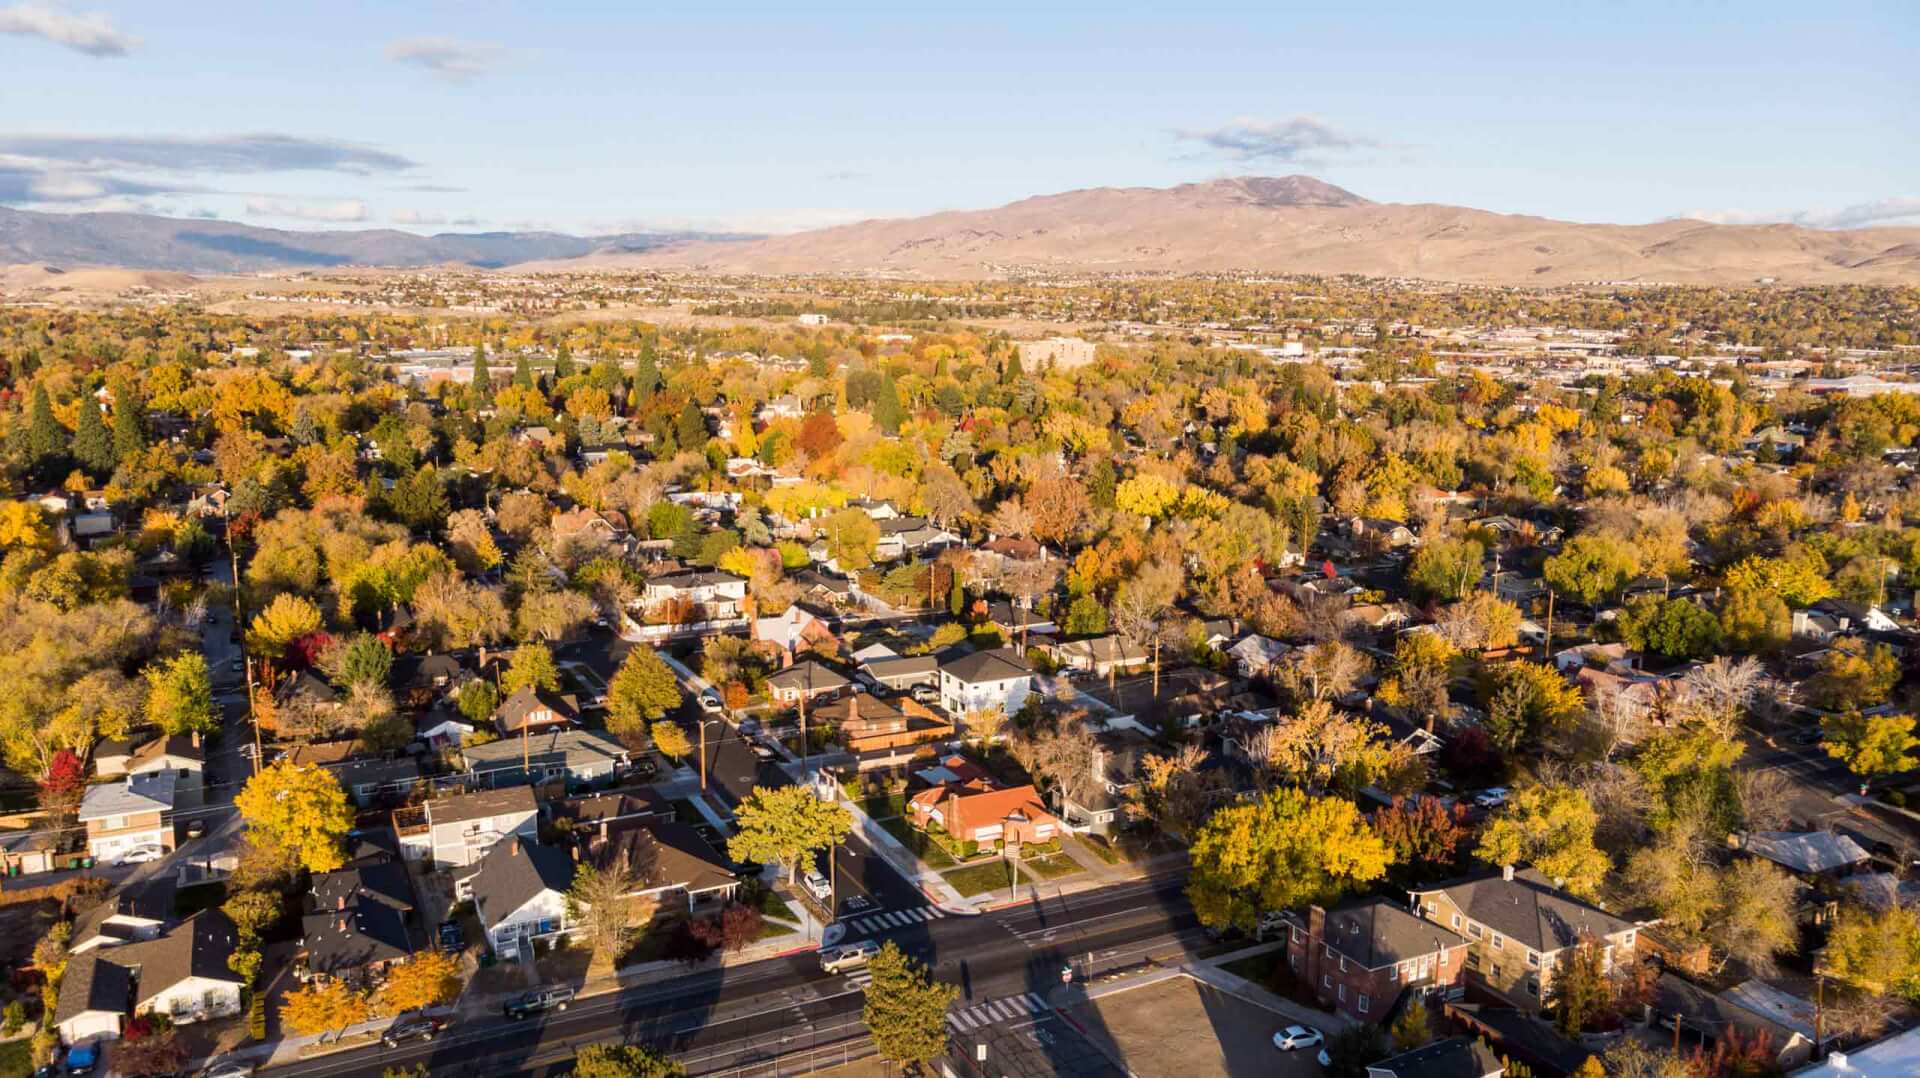 Drone photo of neighborhoods during the fall season looking towards the mountains.